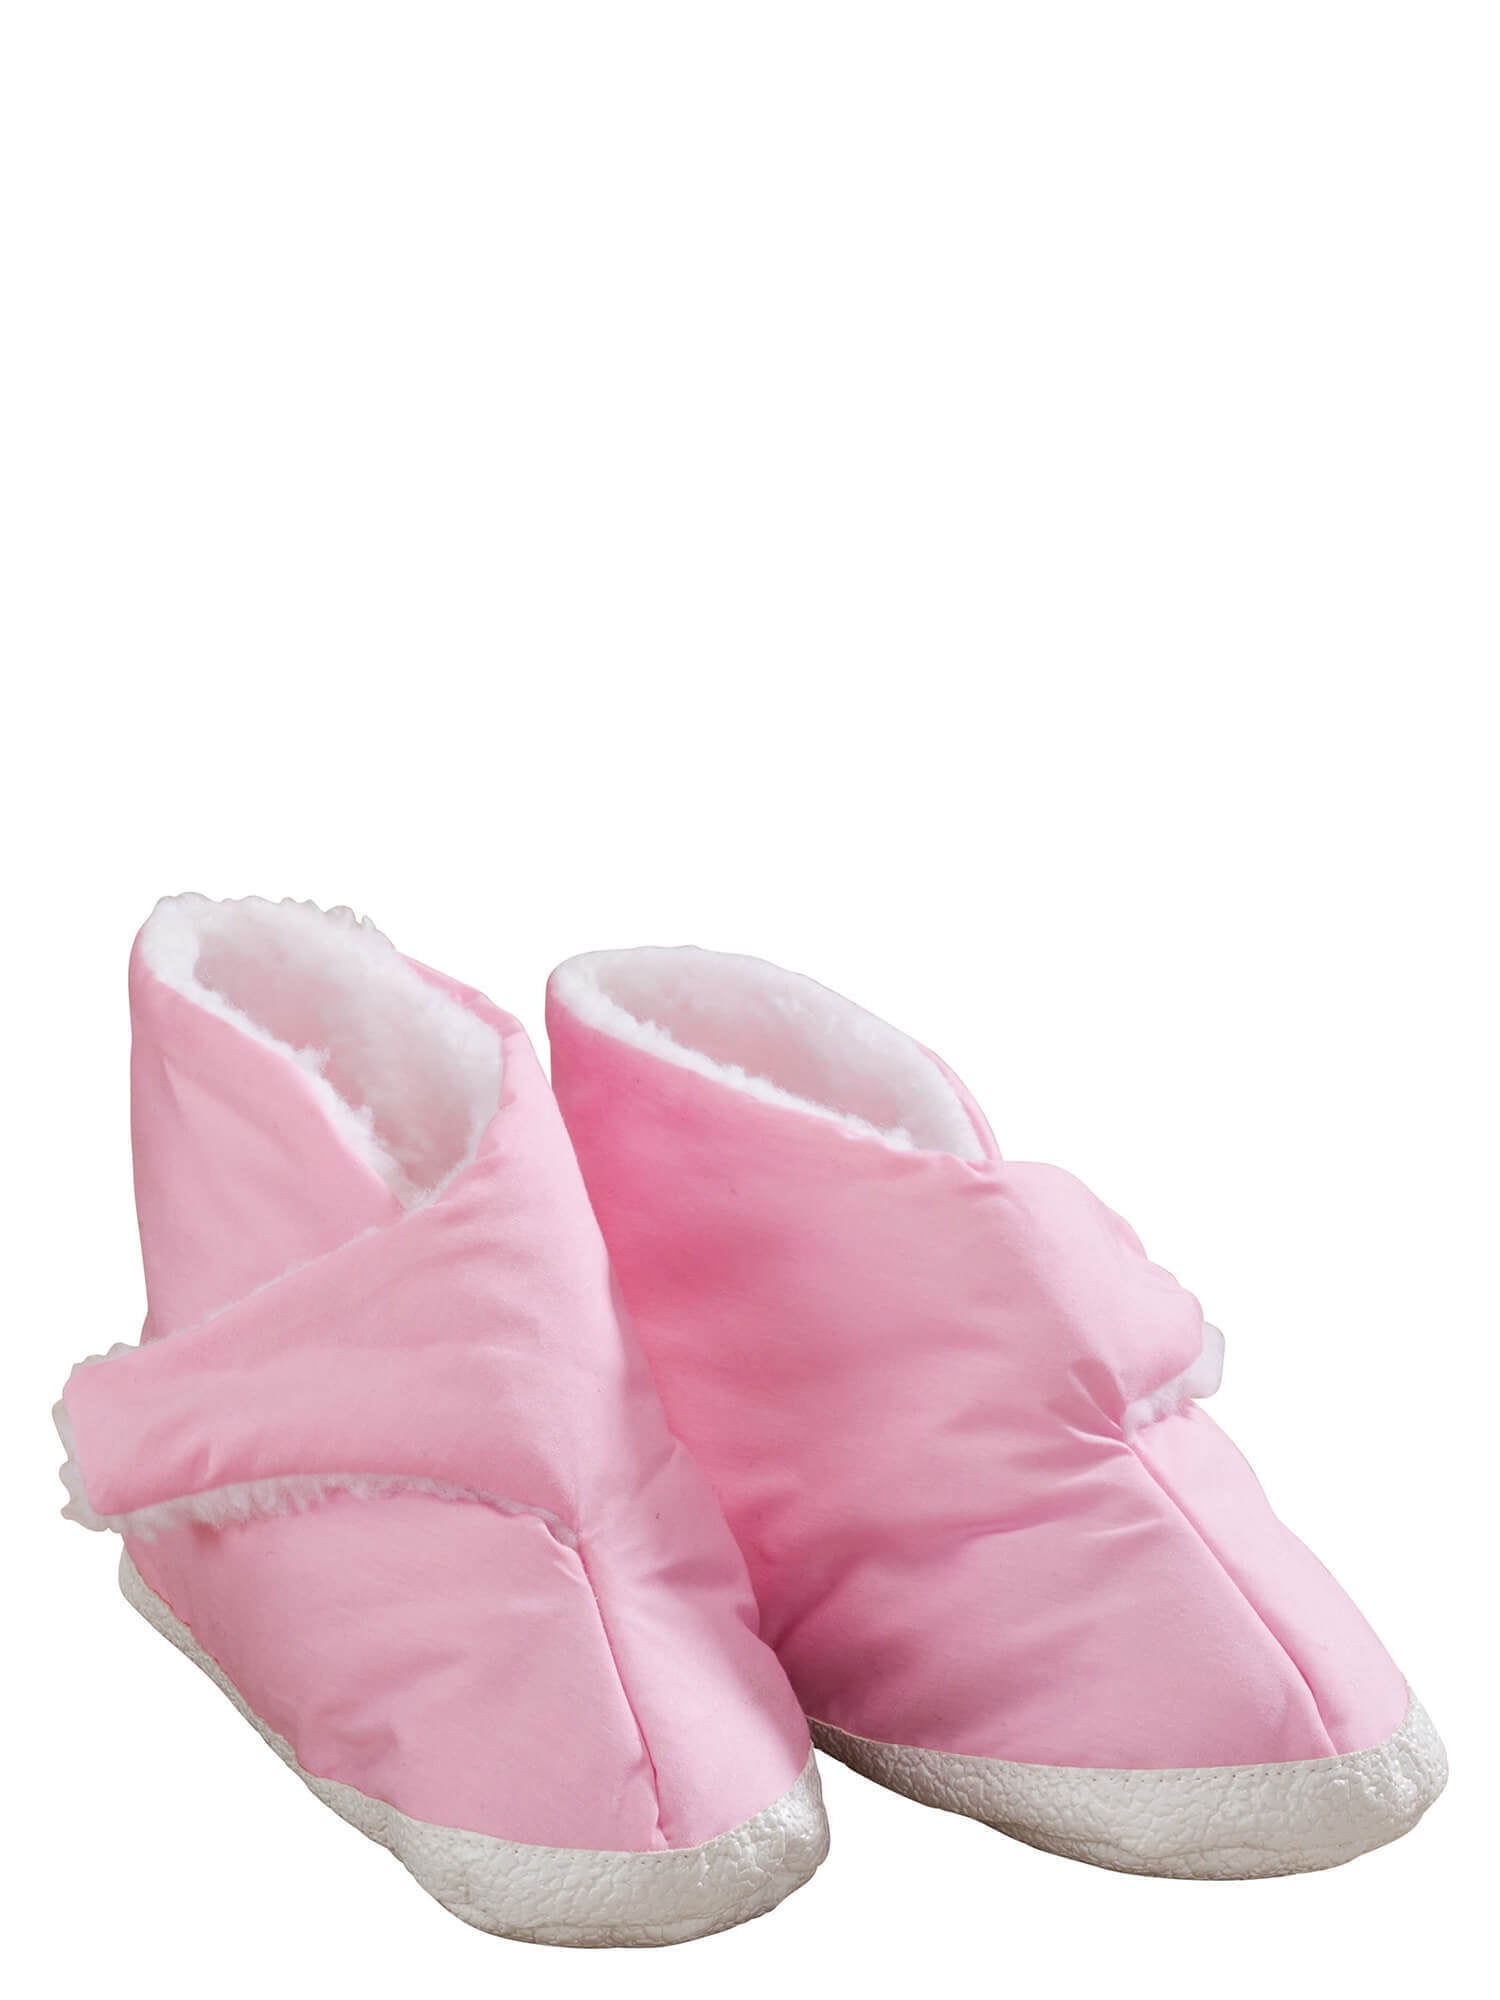 slippers for edema patients